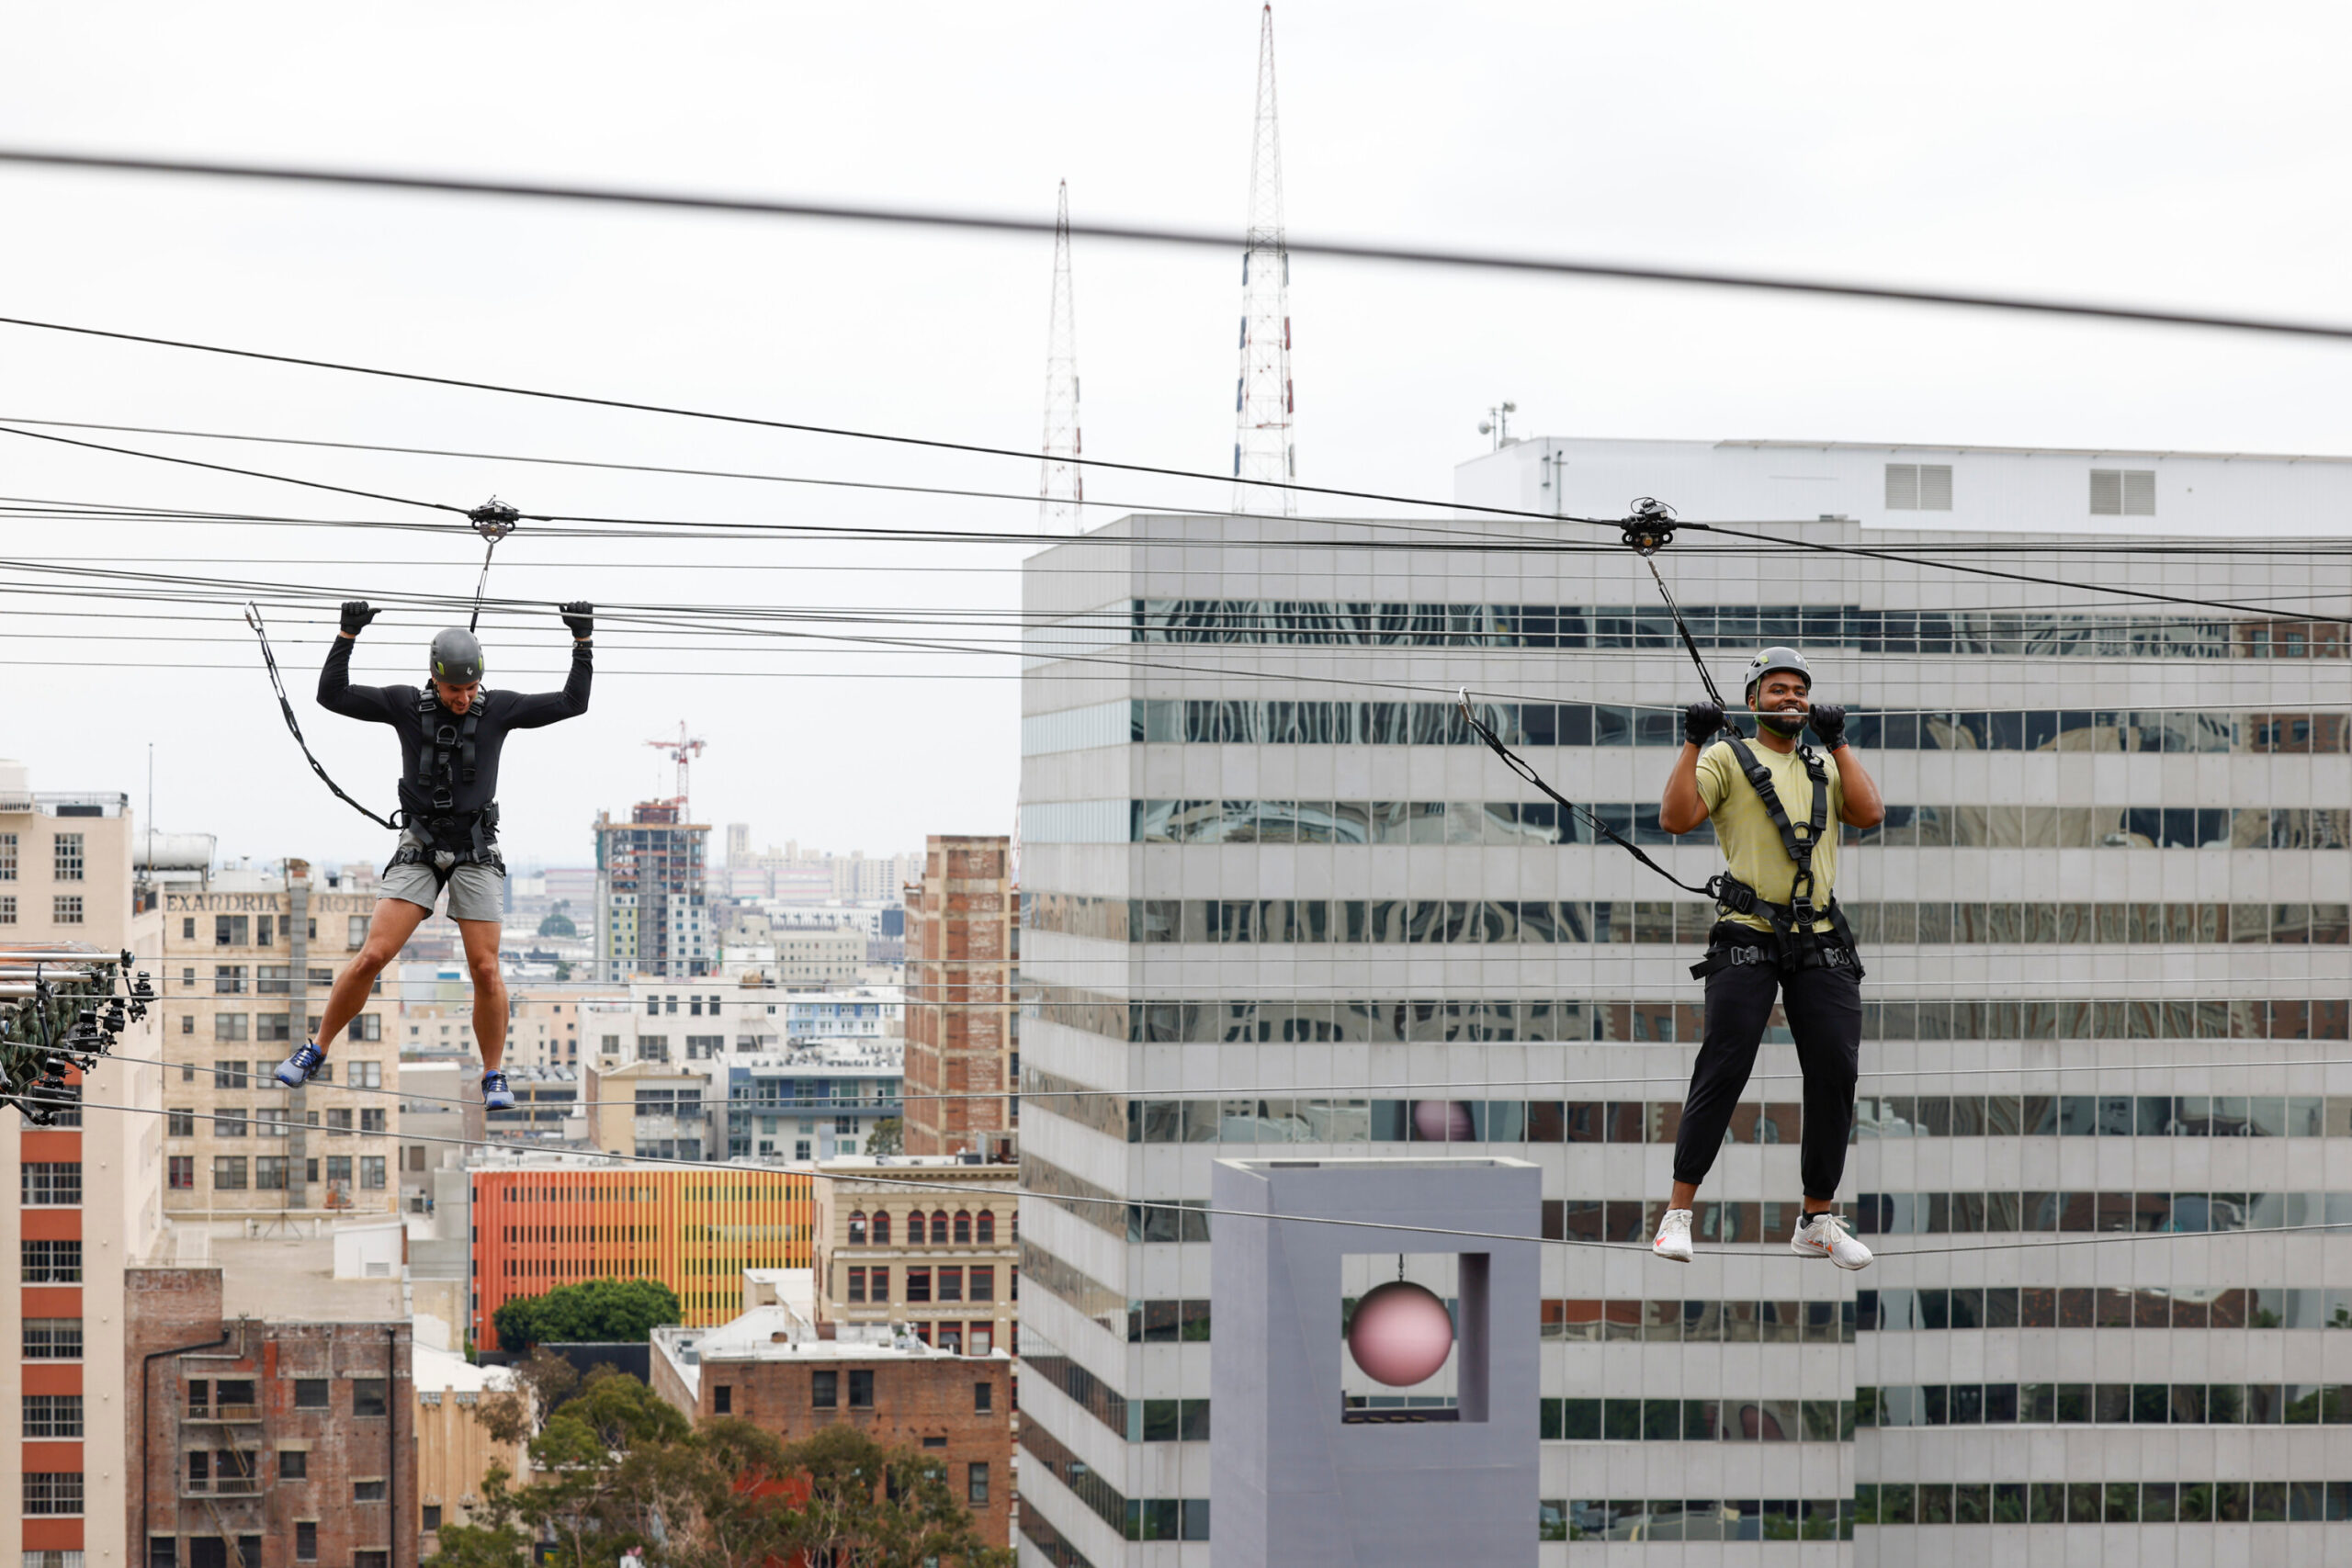 Joe Moskowitz (left) and Greg Franklin traverse a tightrope stretched from one rooftop to another at the historic Biltmore Hotel in downtown LA. (Photo Credit: Sonja Flemming/CBS)